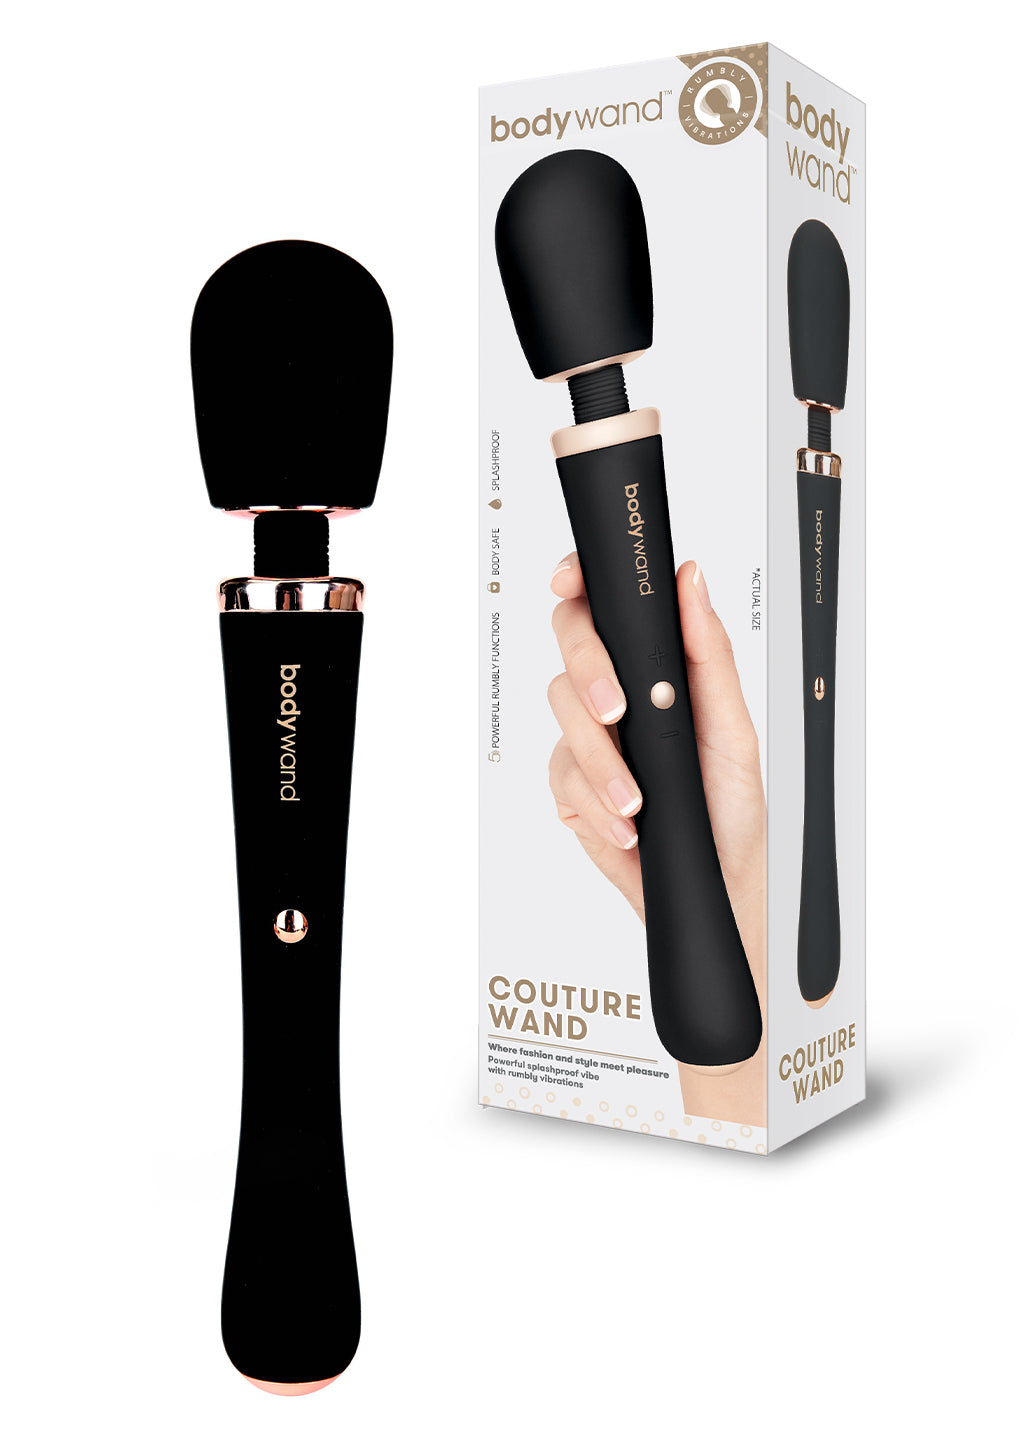 Bodywand Couture Wand